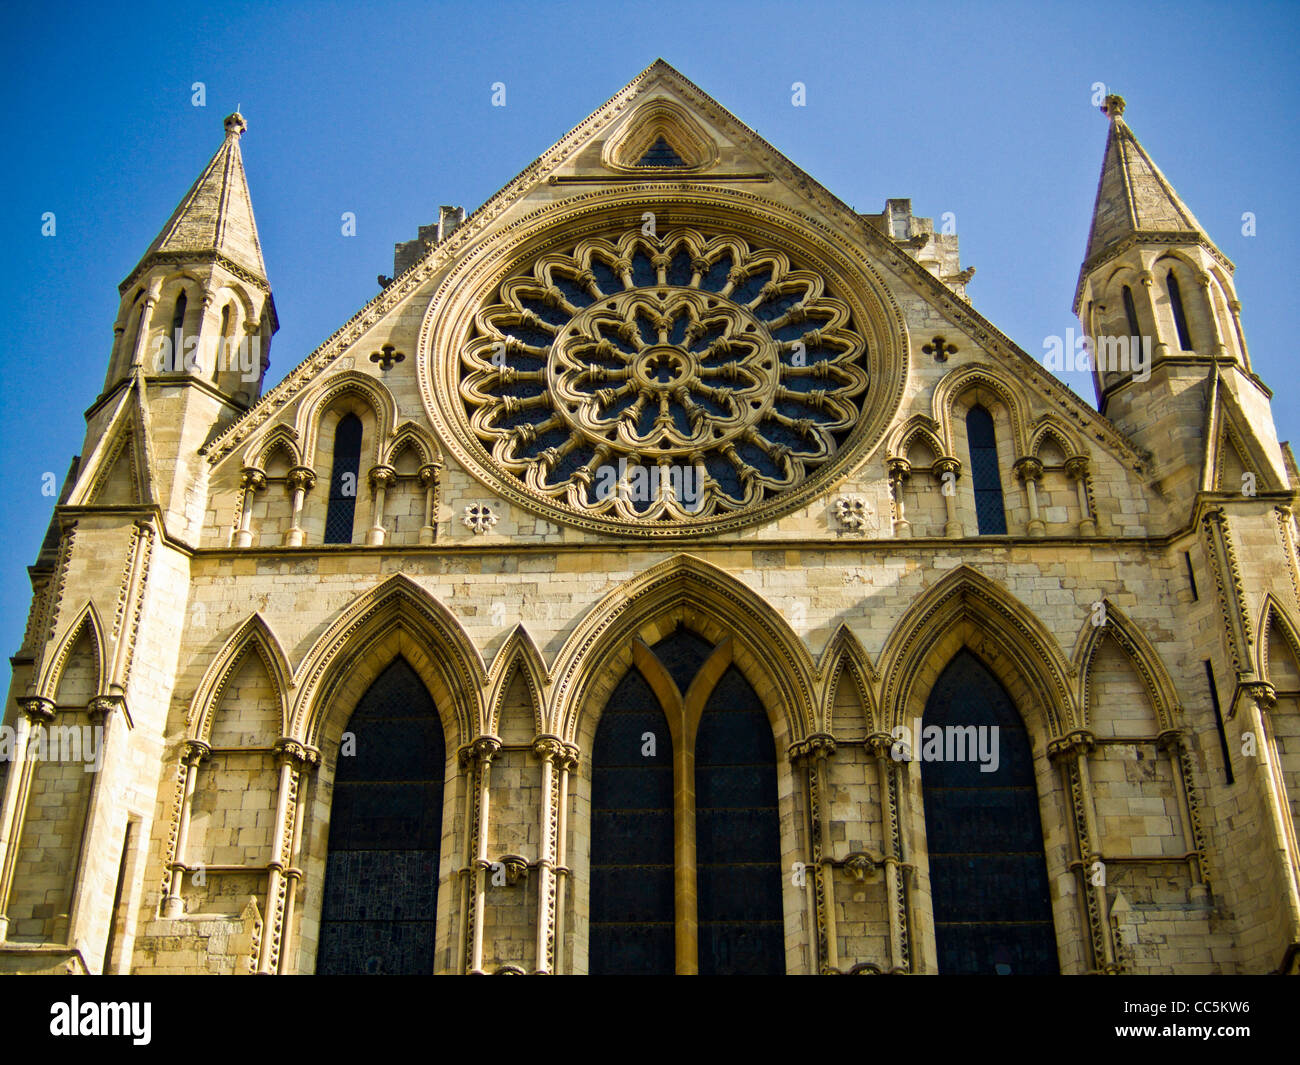 Rose Window on the south facade of York Minster, UK. Stock Photo